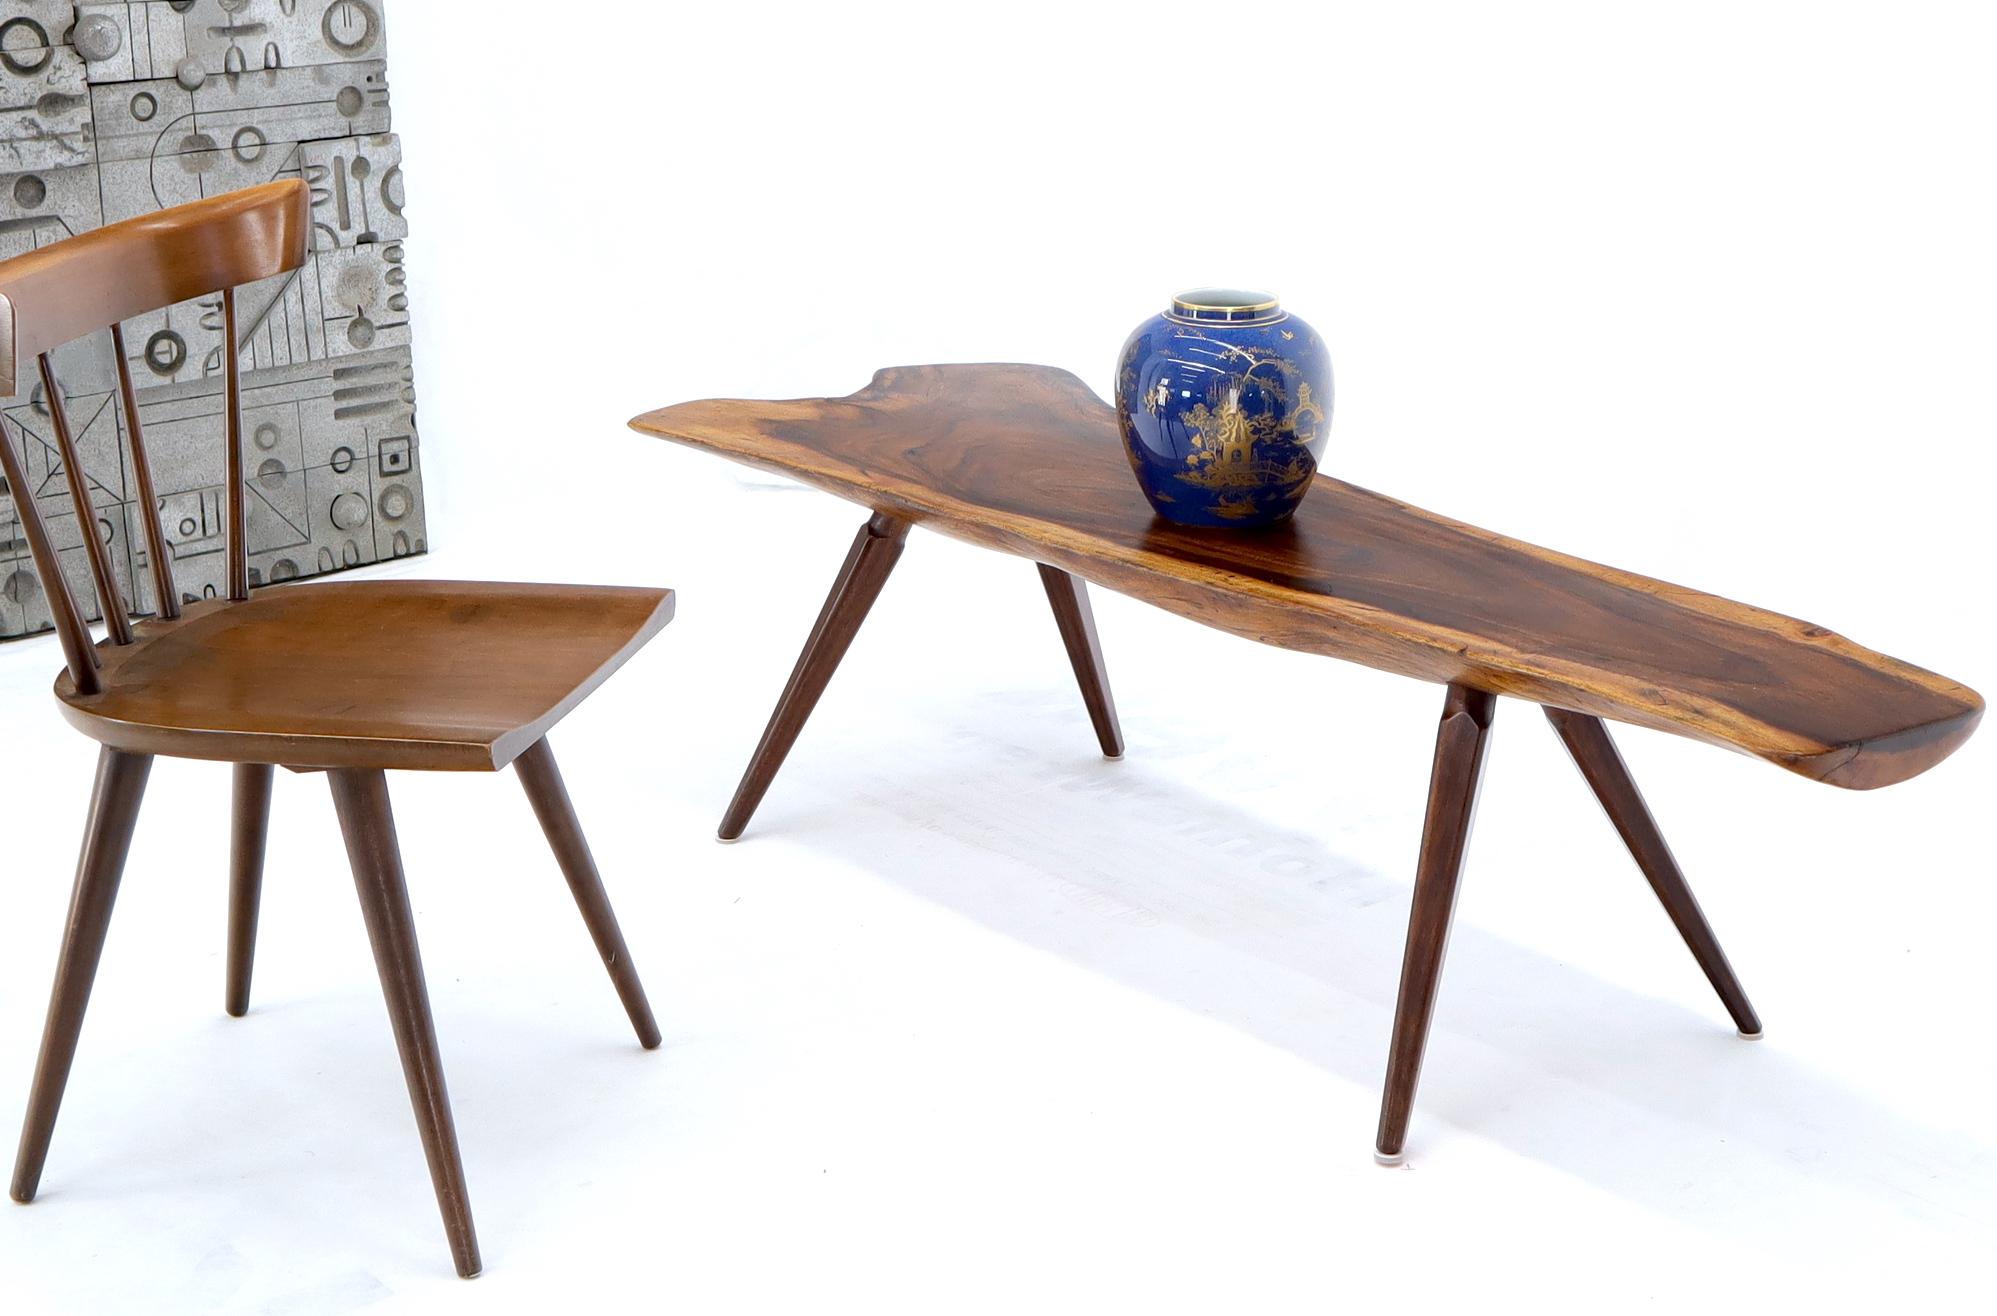 Very nice very much in George Nakashima style solid walnut slab coffee table.